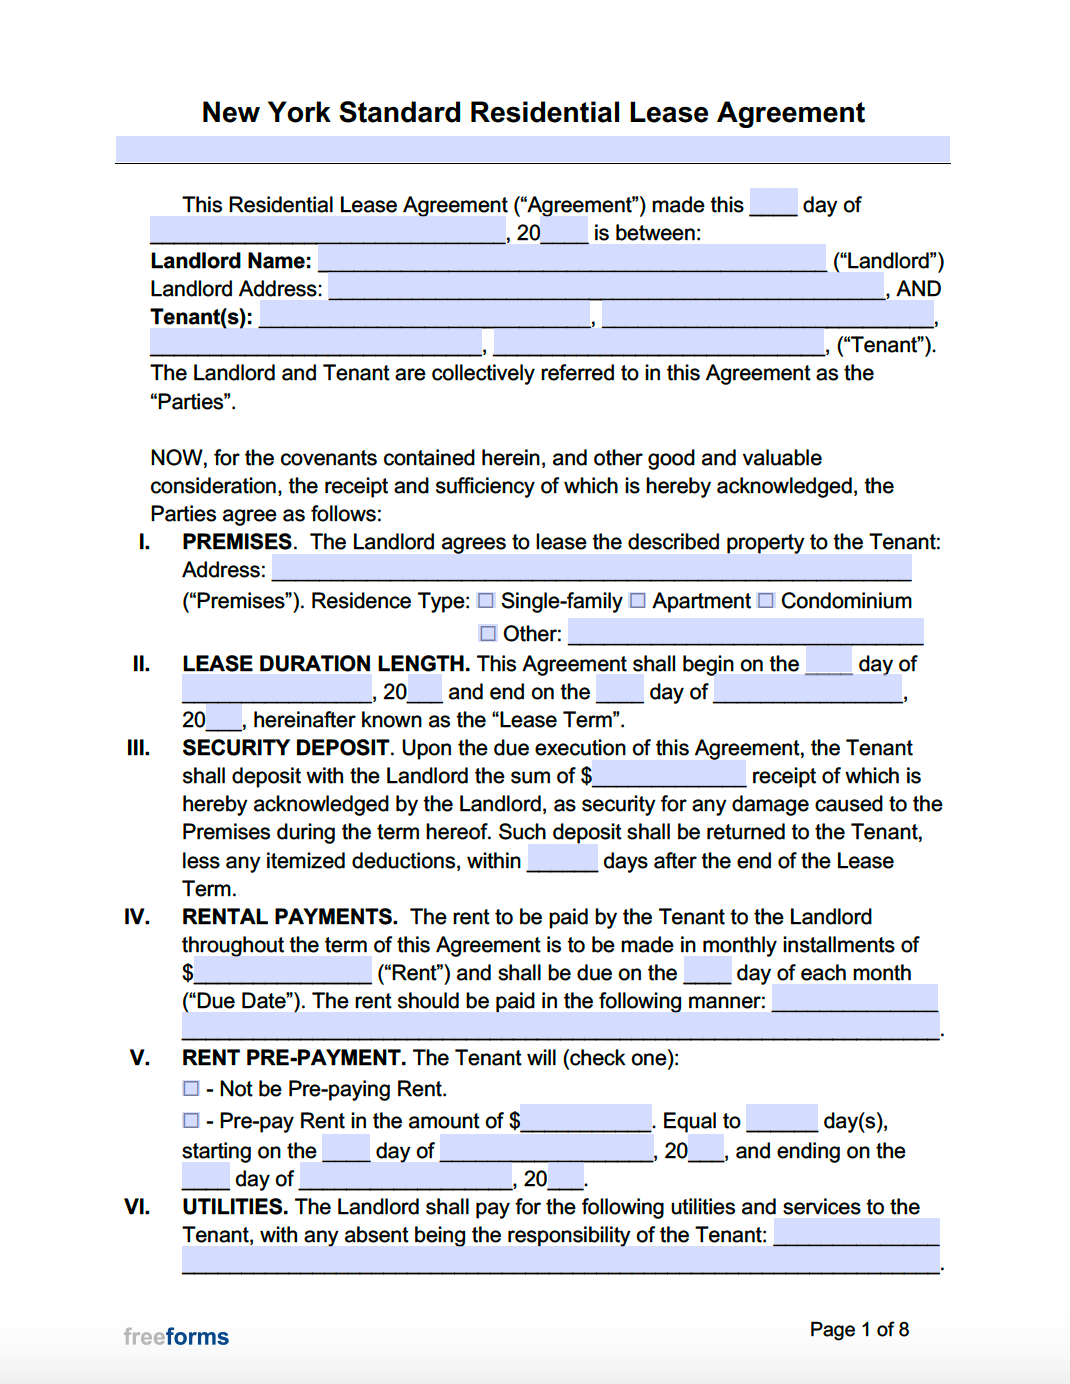 Free New York Standard Residential Lease Agreement Template | PDF | WORD